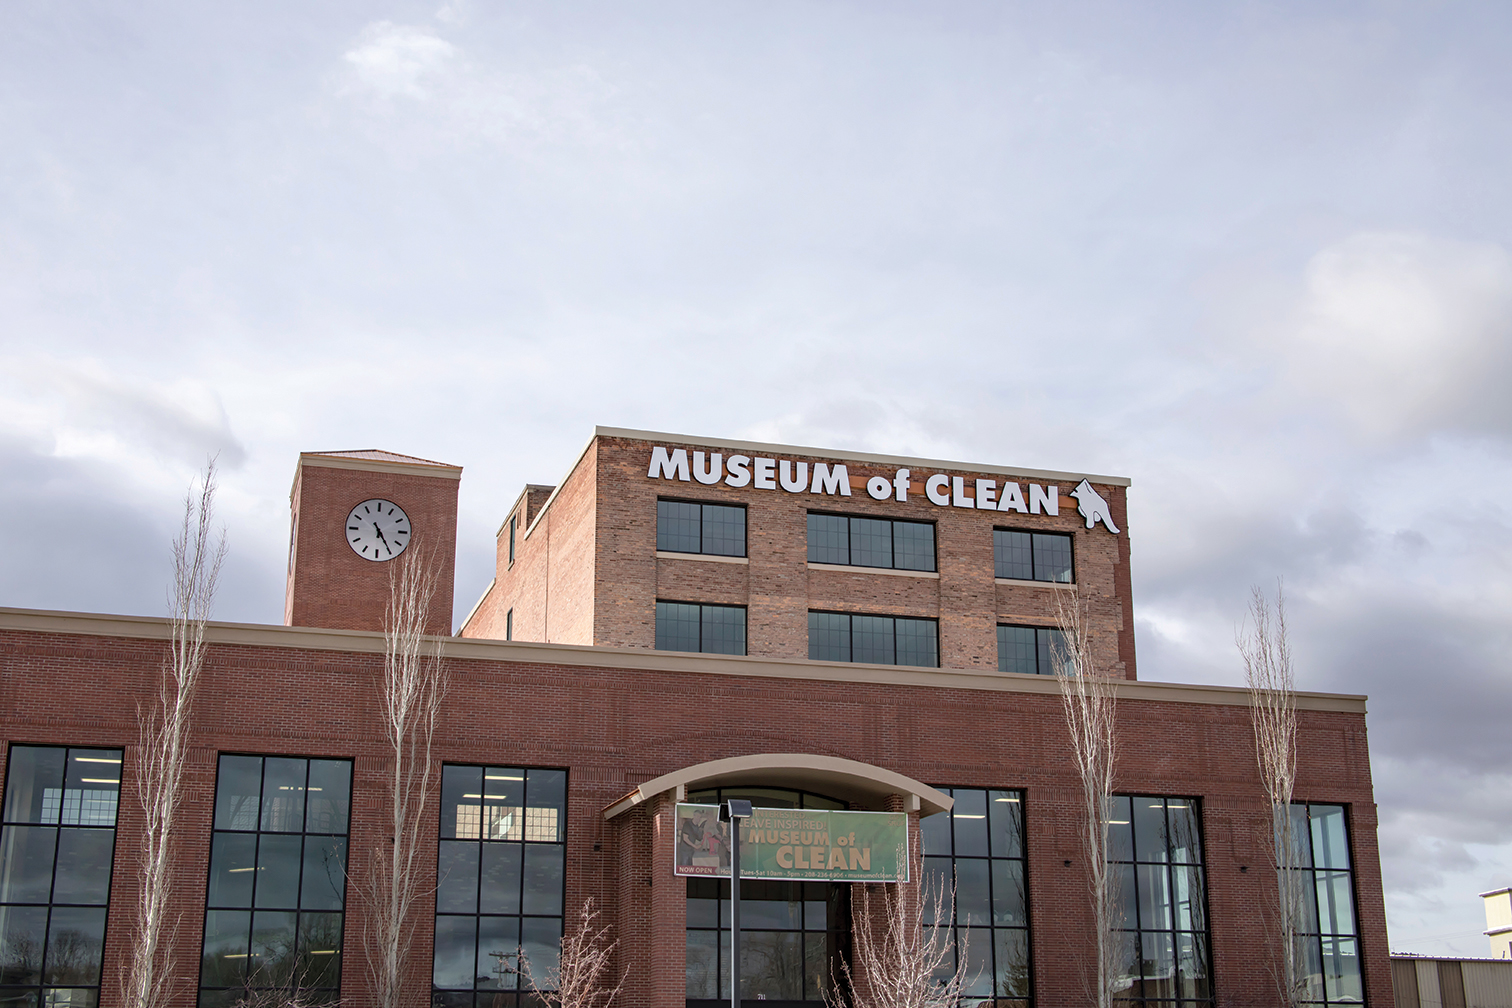 Don Aslett's Museum of Clean - Idaho For 91 Days